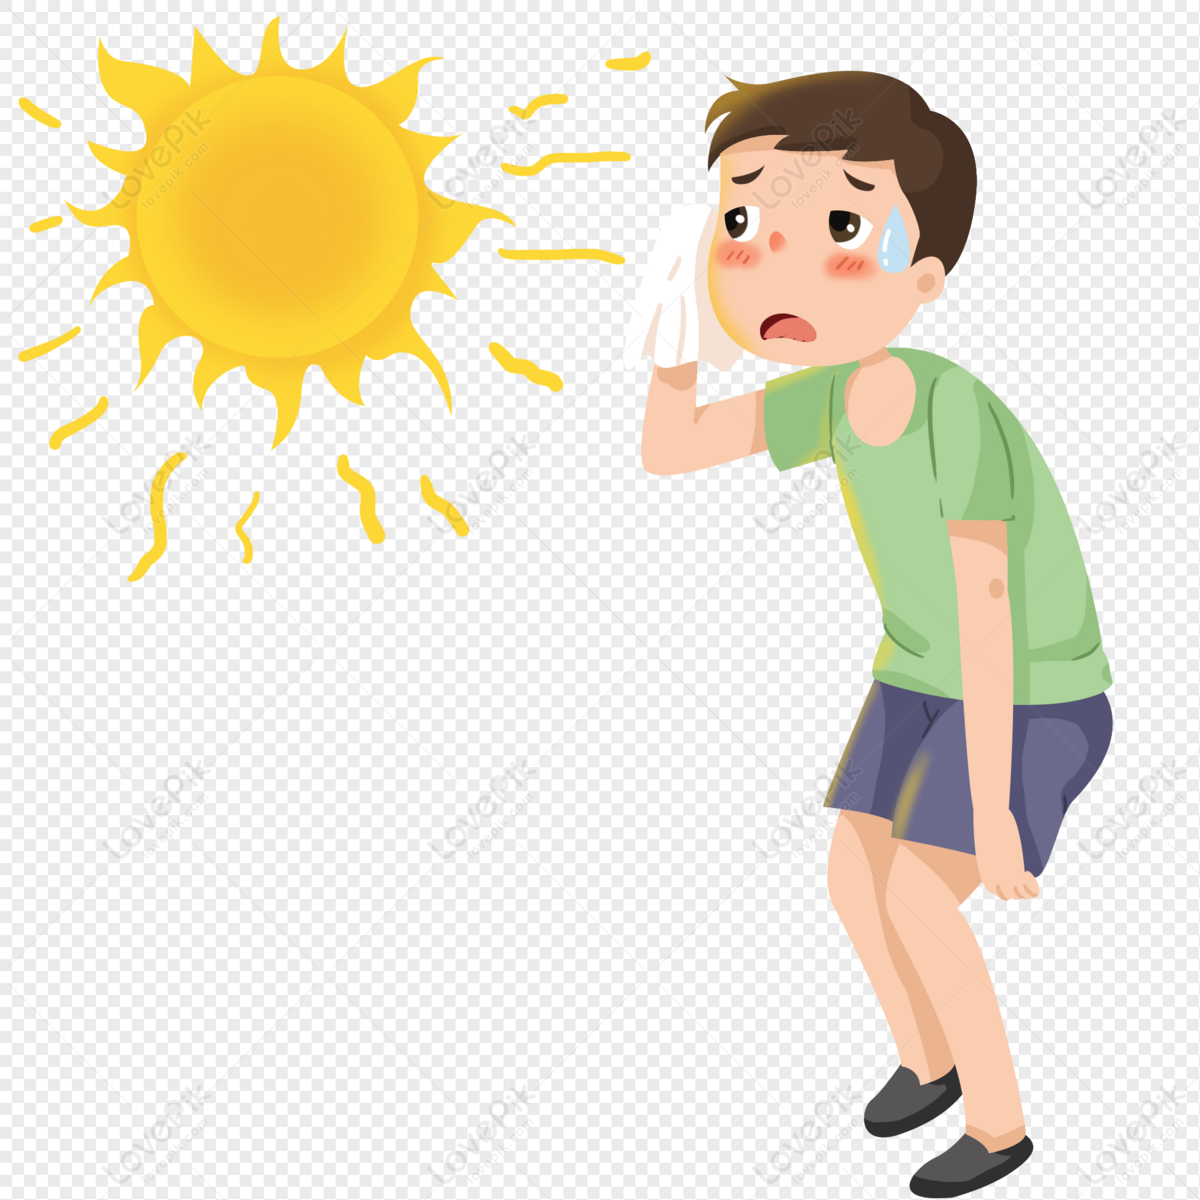 Man Sweating Under The Sun PNG Transparent Image And Clipart Image For Free  Download - Lovepik | 401241787